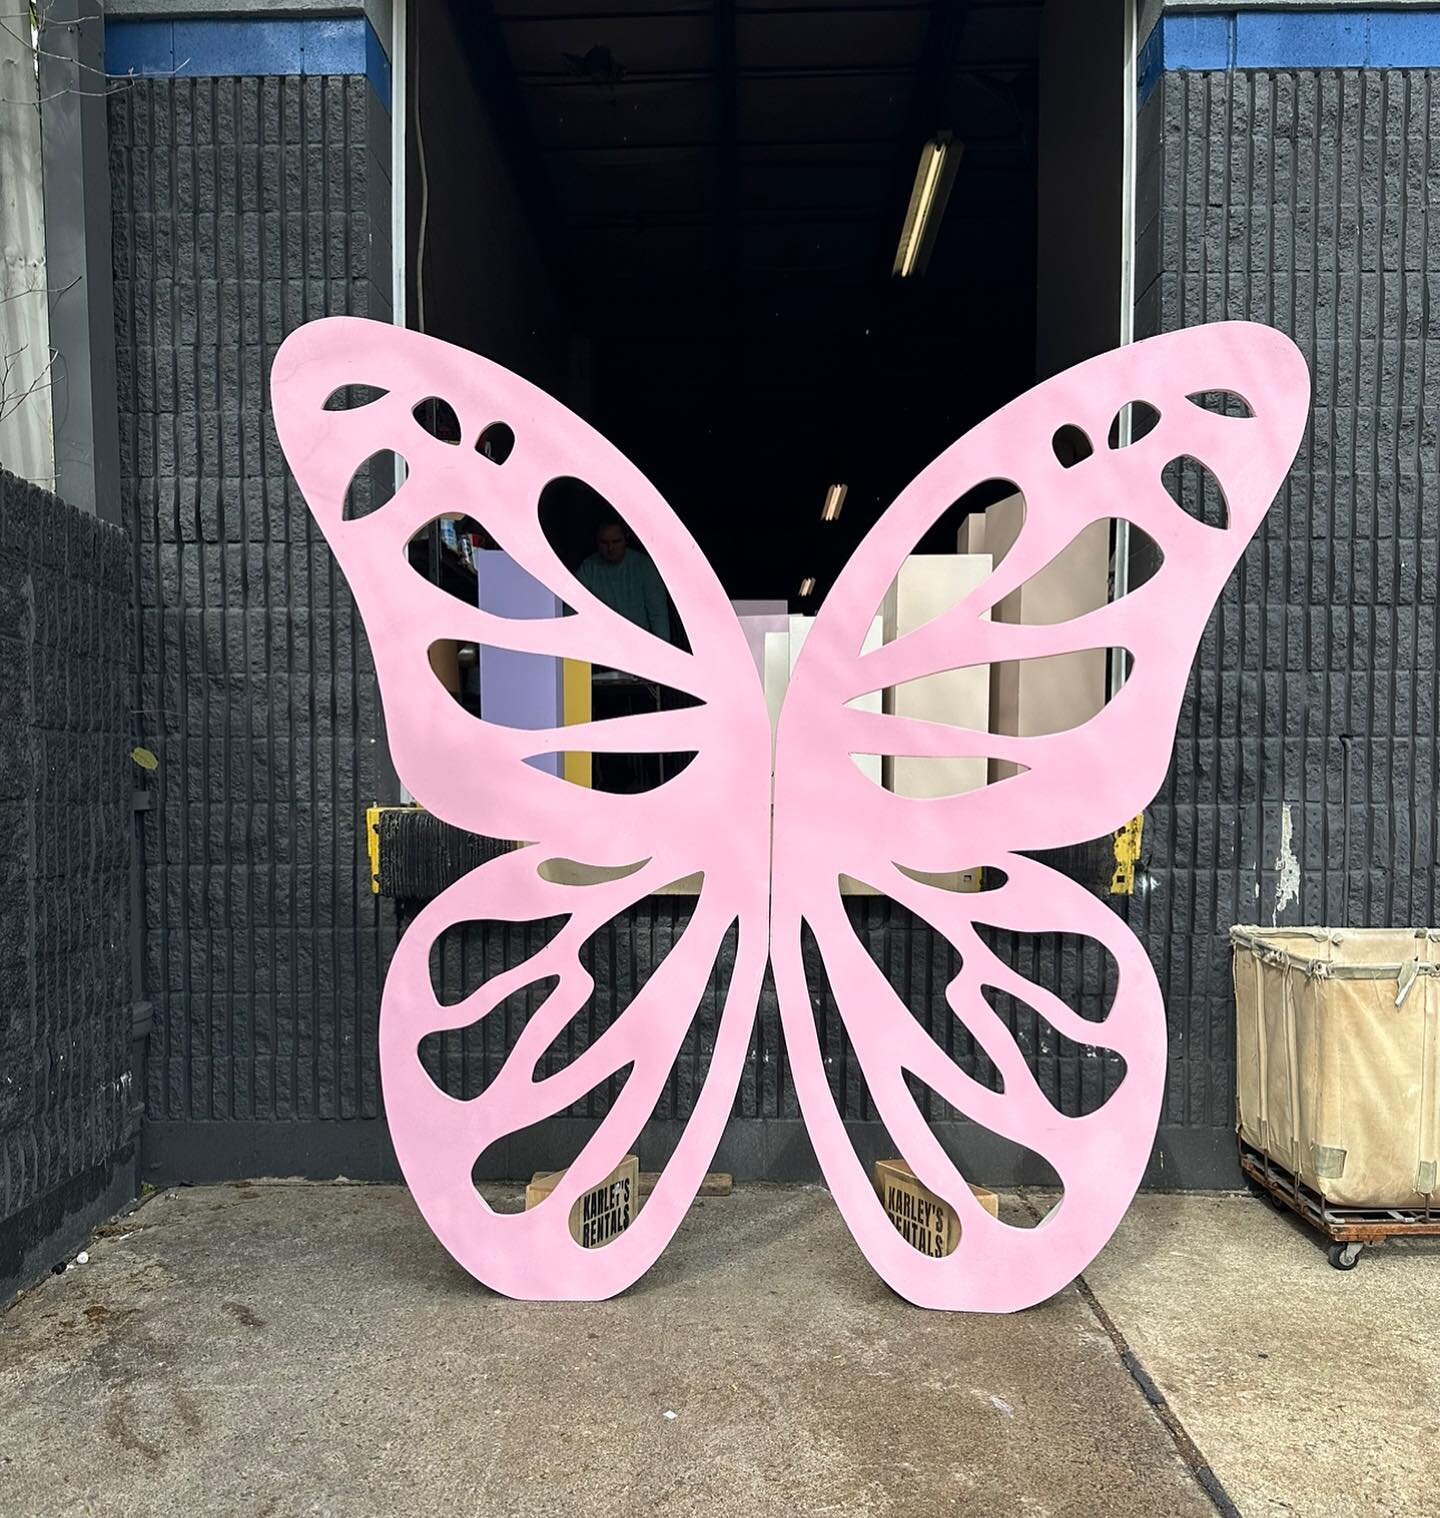 Fly into a world of color with our stunning 8&rsquo;x8&rsquo; butterfly rental! 🦋✨ Choose from 75 vibrant colors to make your event pop! Only $200. Book yours today and let your imagination take flight! 🌈